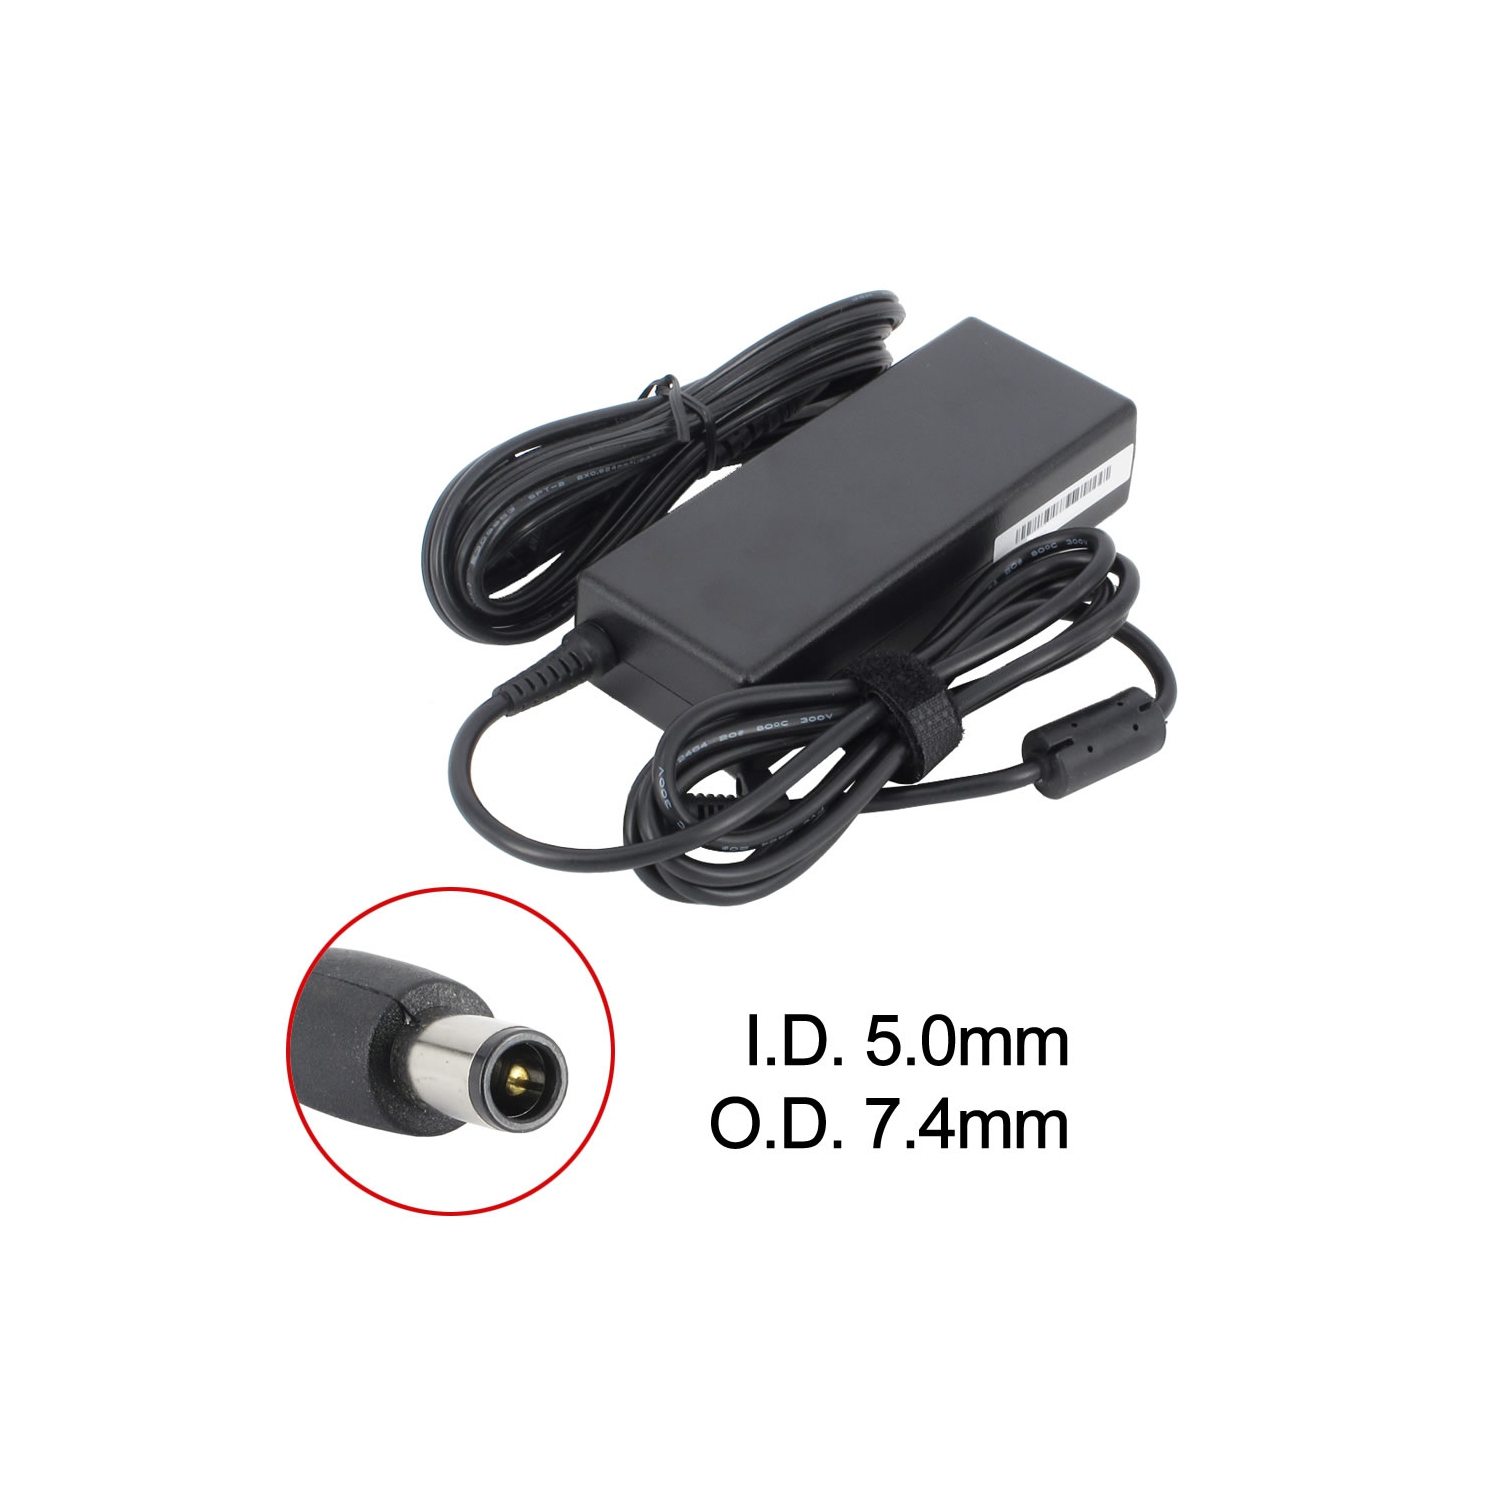 New Laptop AC Adapter for Dell Inspiron 14R N7110, 09T215, 310-7251, 310-9376, 331-5968, CF823, FA90PM135, N6M8J, TJ76K